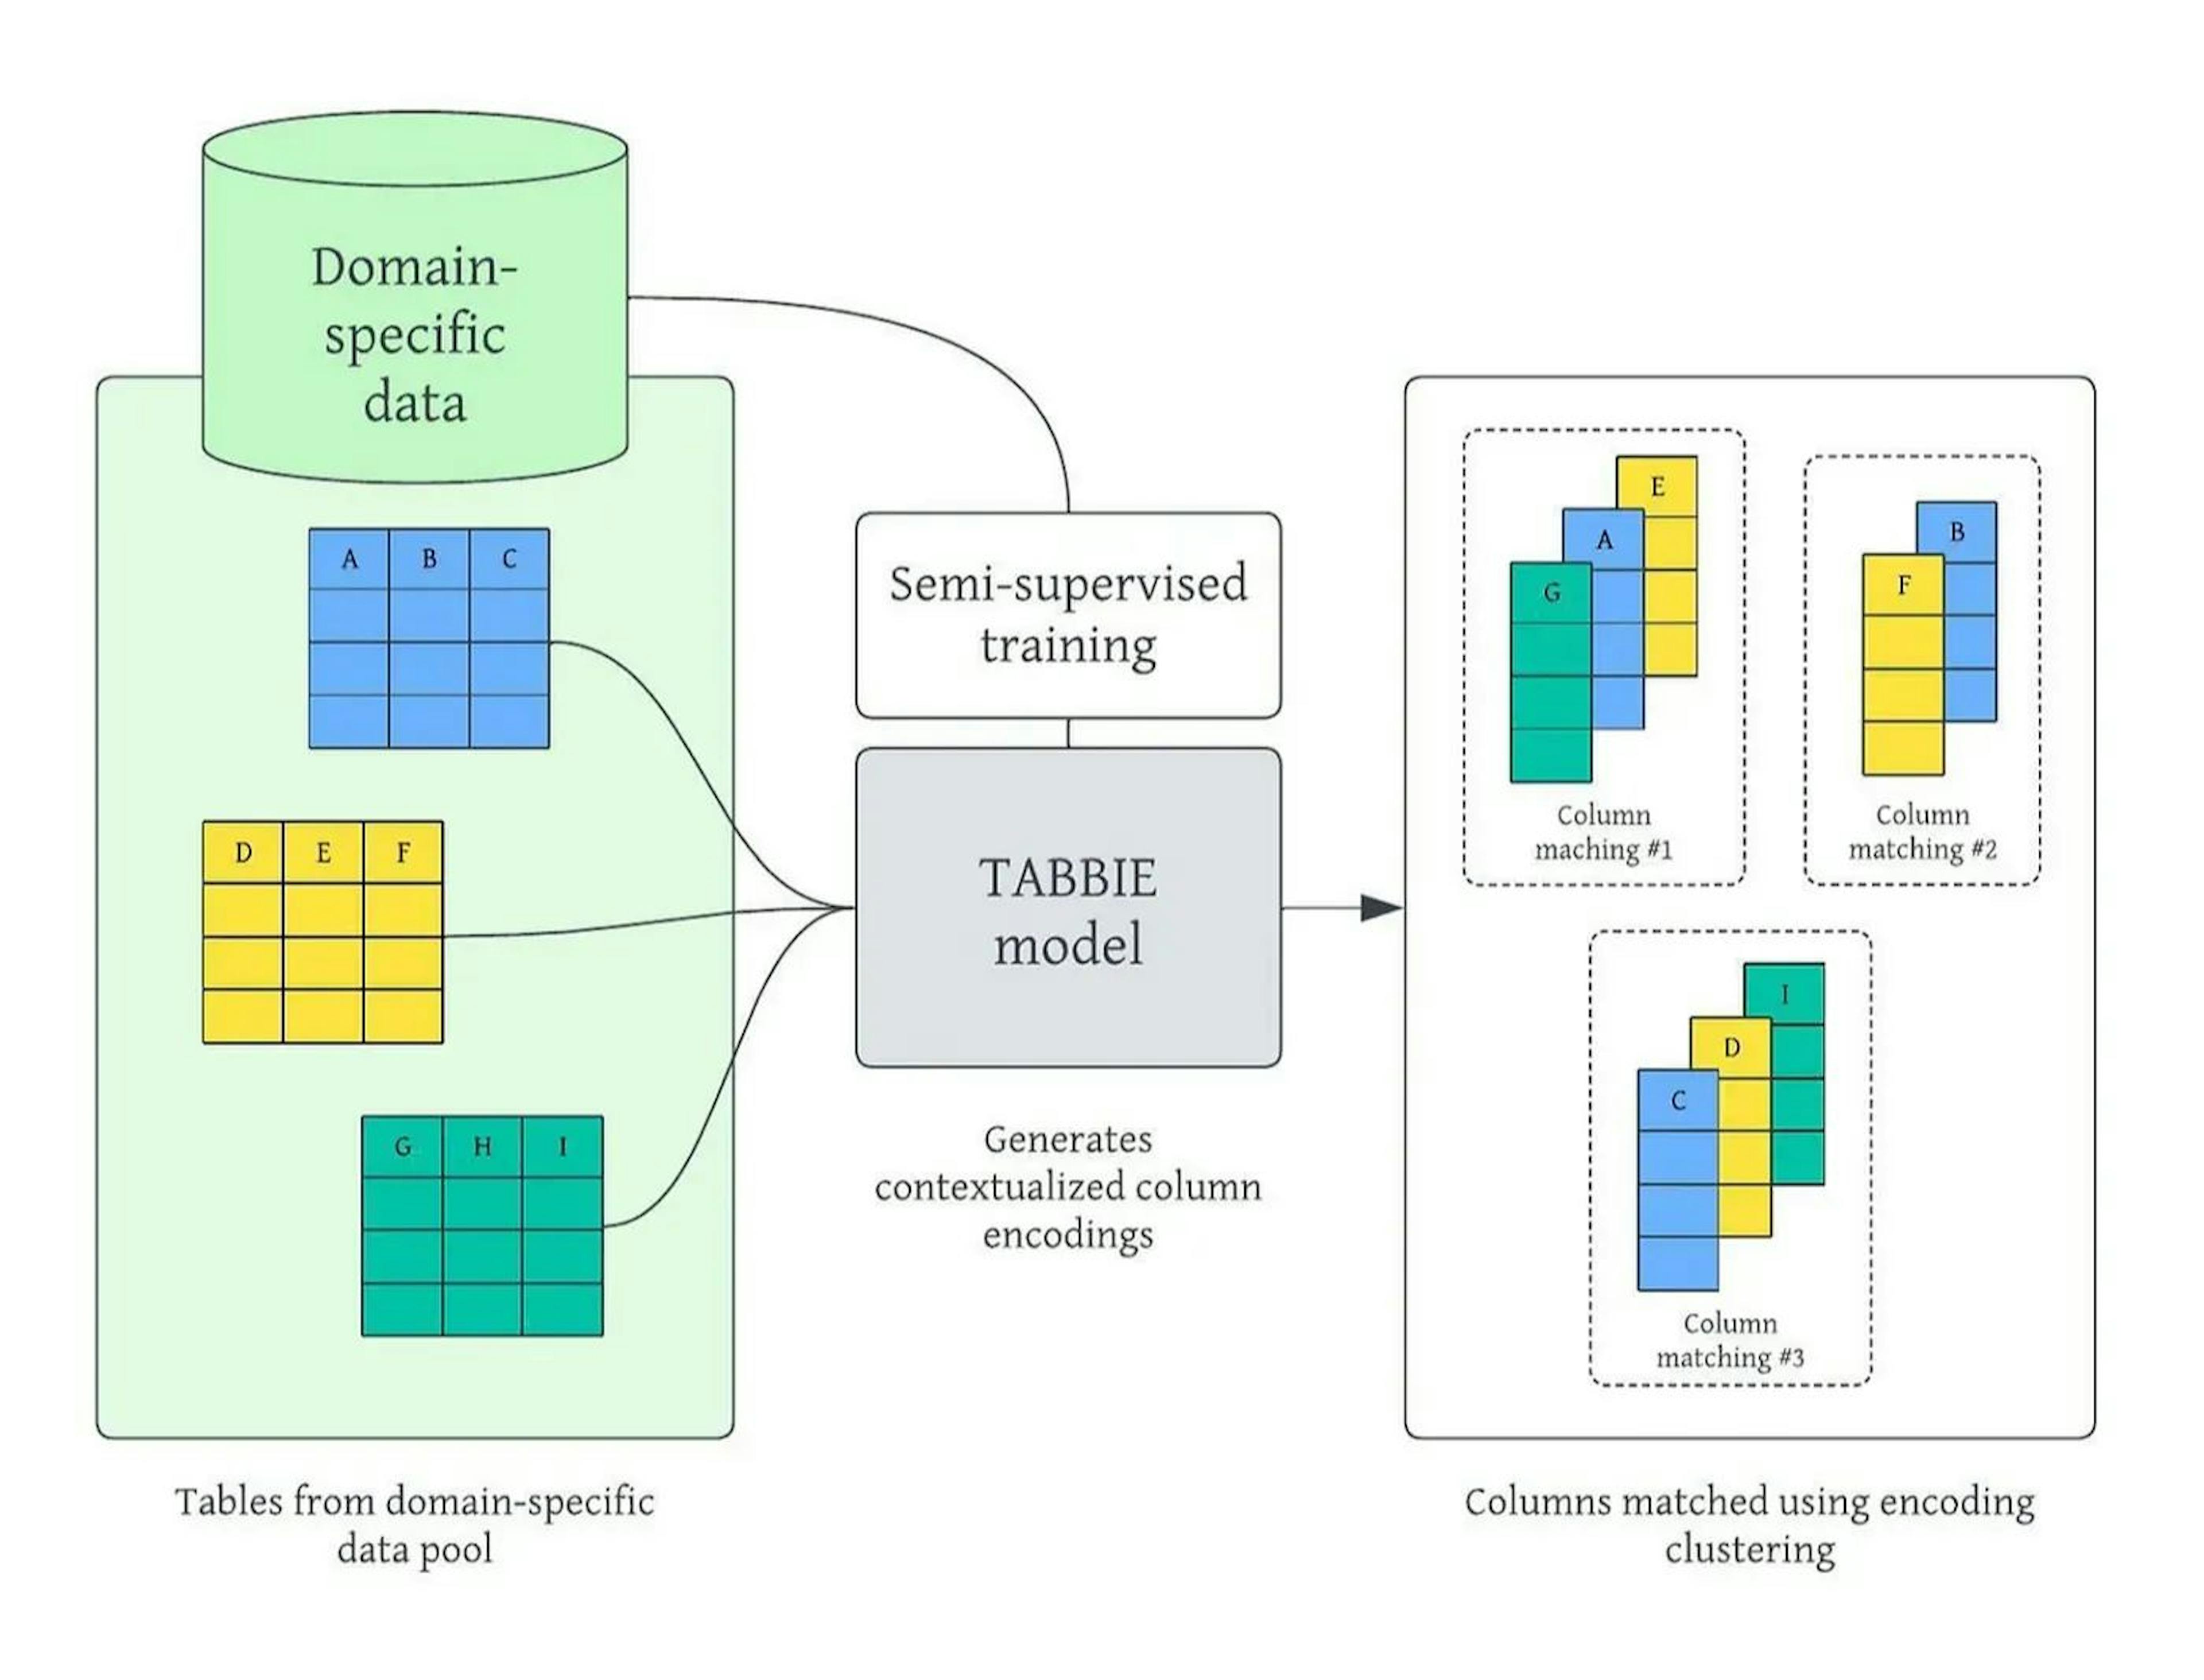 [Figure 4]: The representational ability of the TABBIE model allows us to improve column-matching performance on domain-specific data without the need to annotate it.